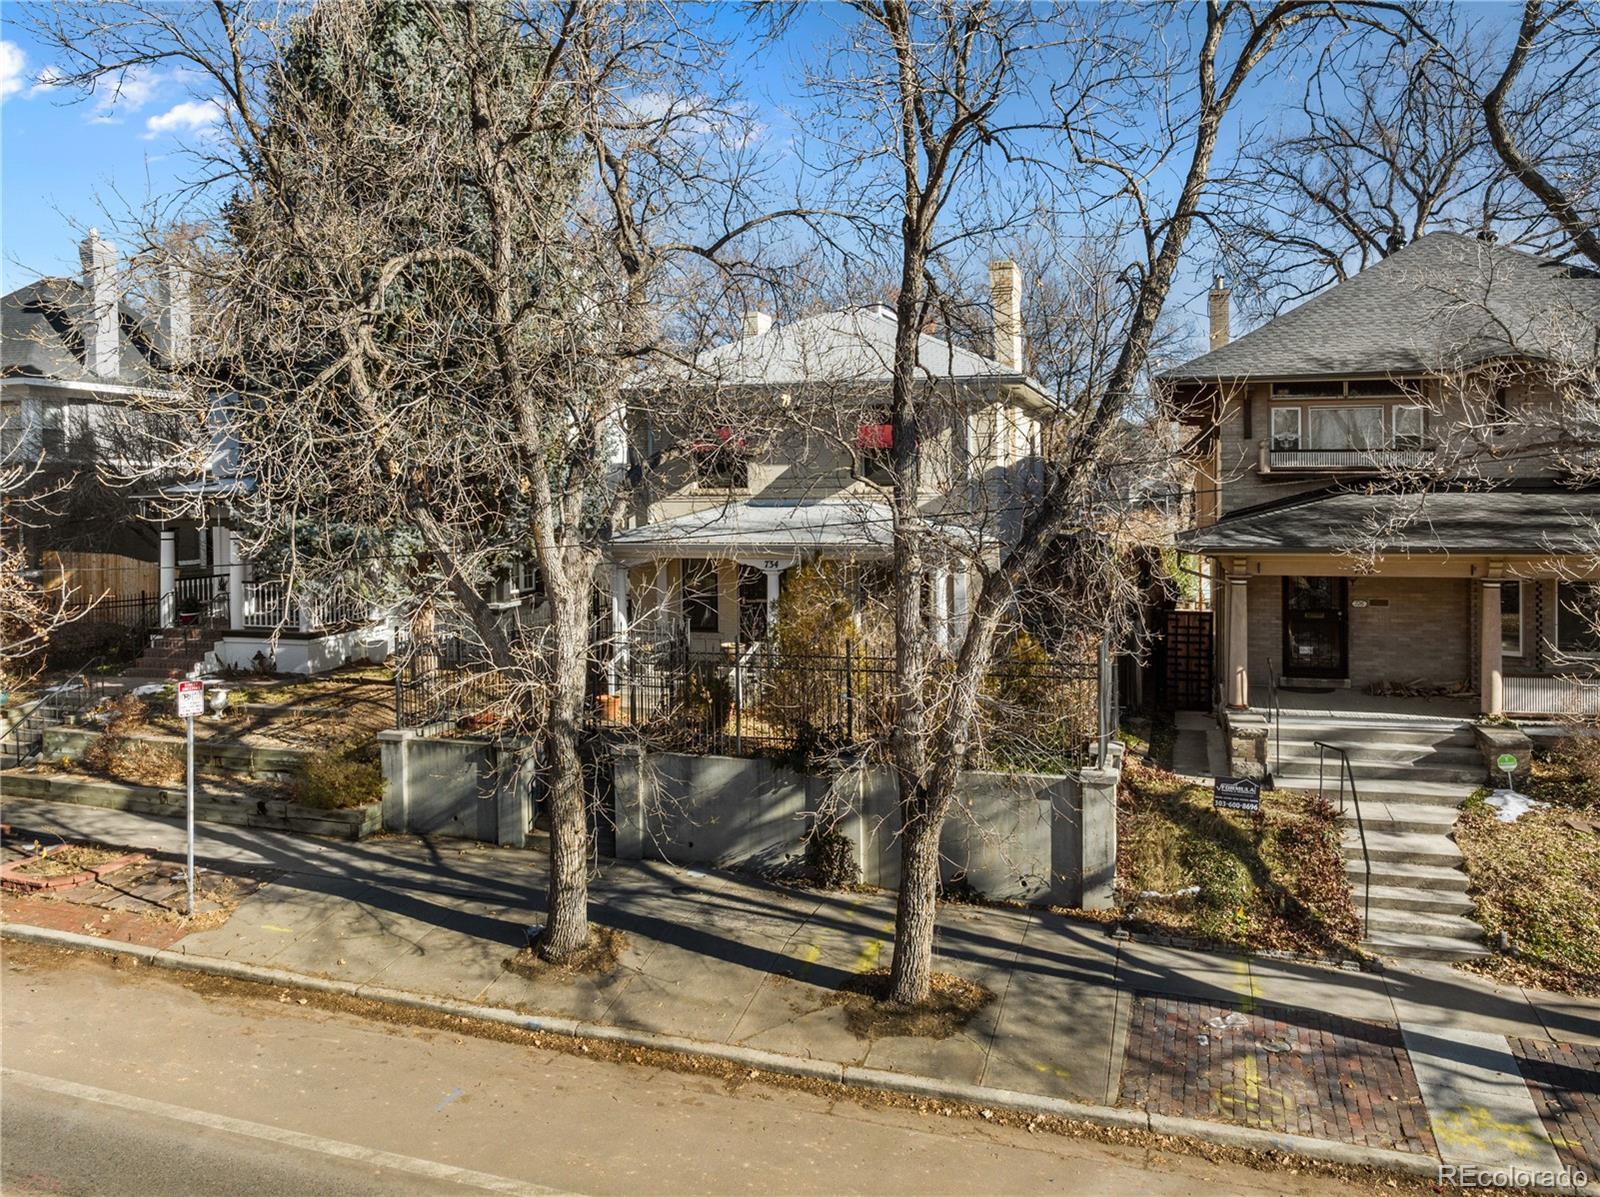 734 n downing street, denver sold home. Closed on 2024-03-14 for $870,000.